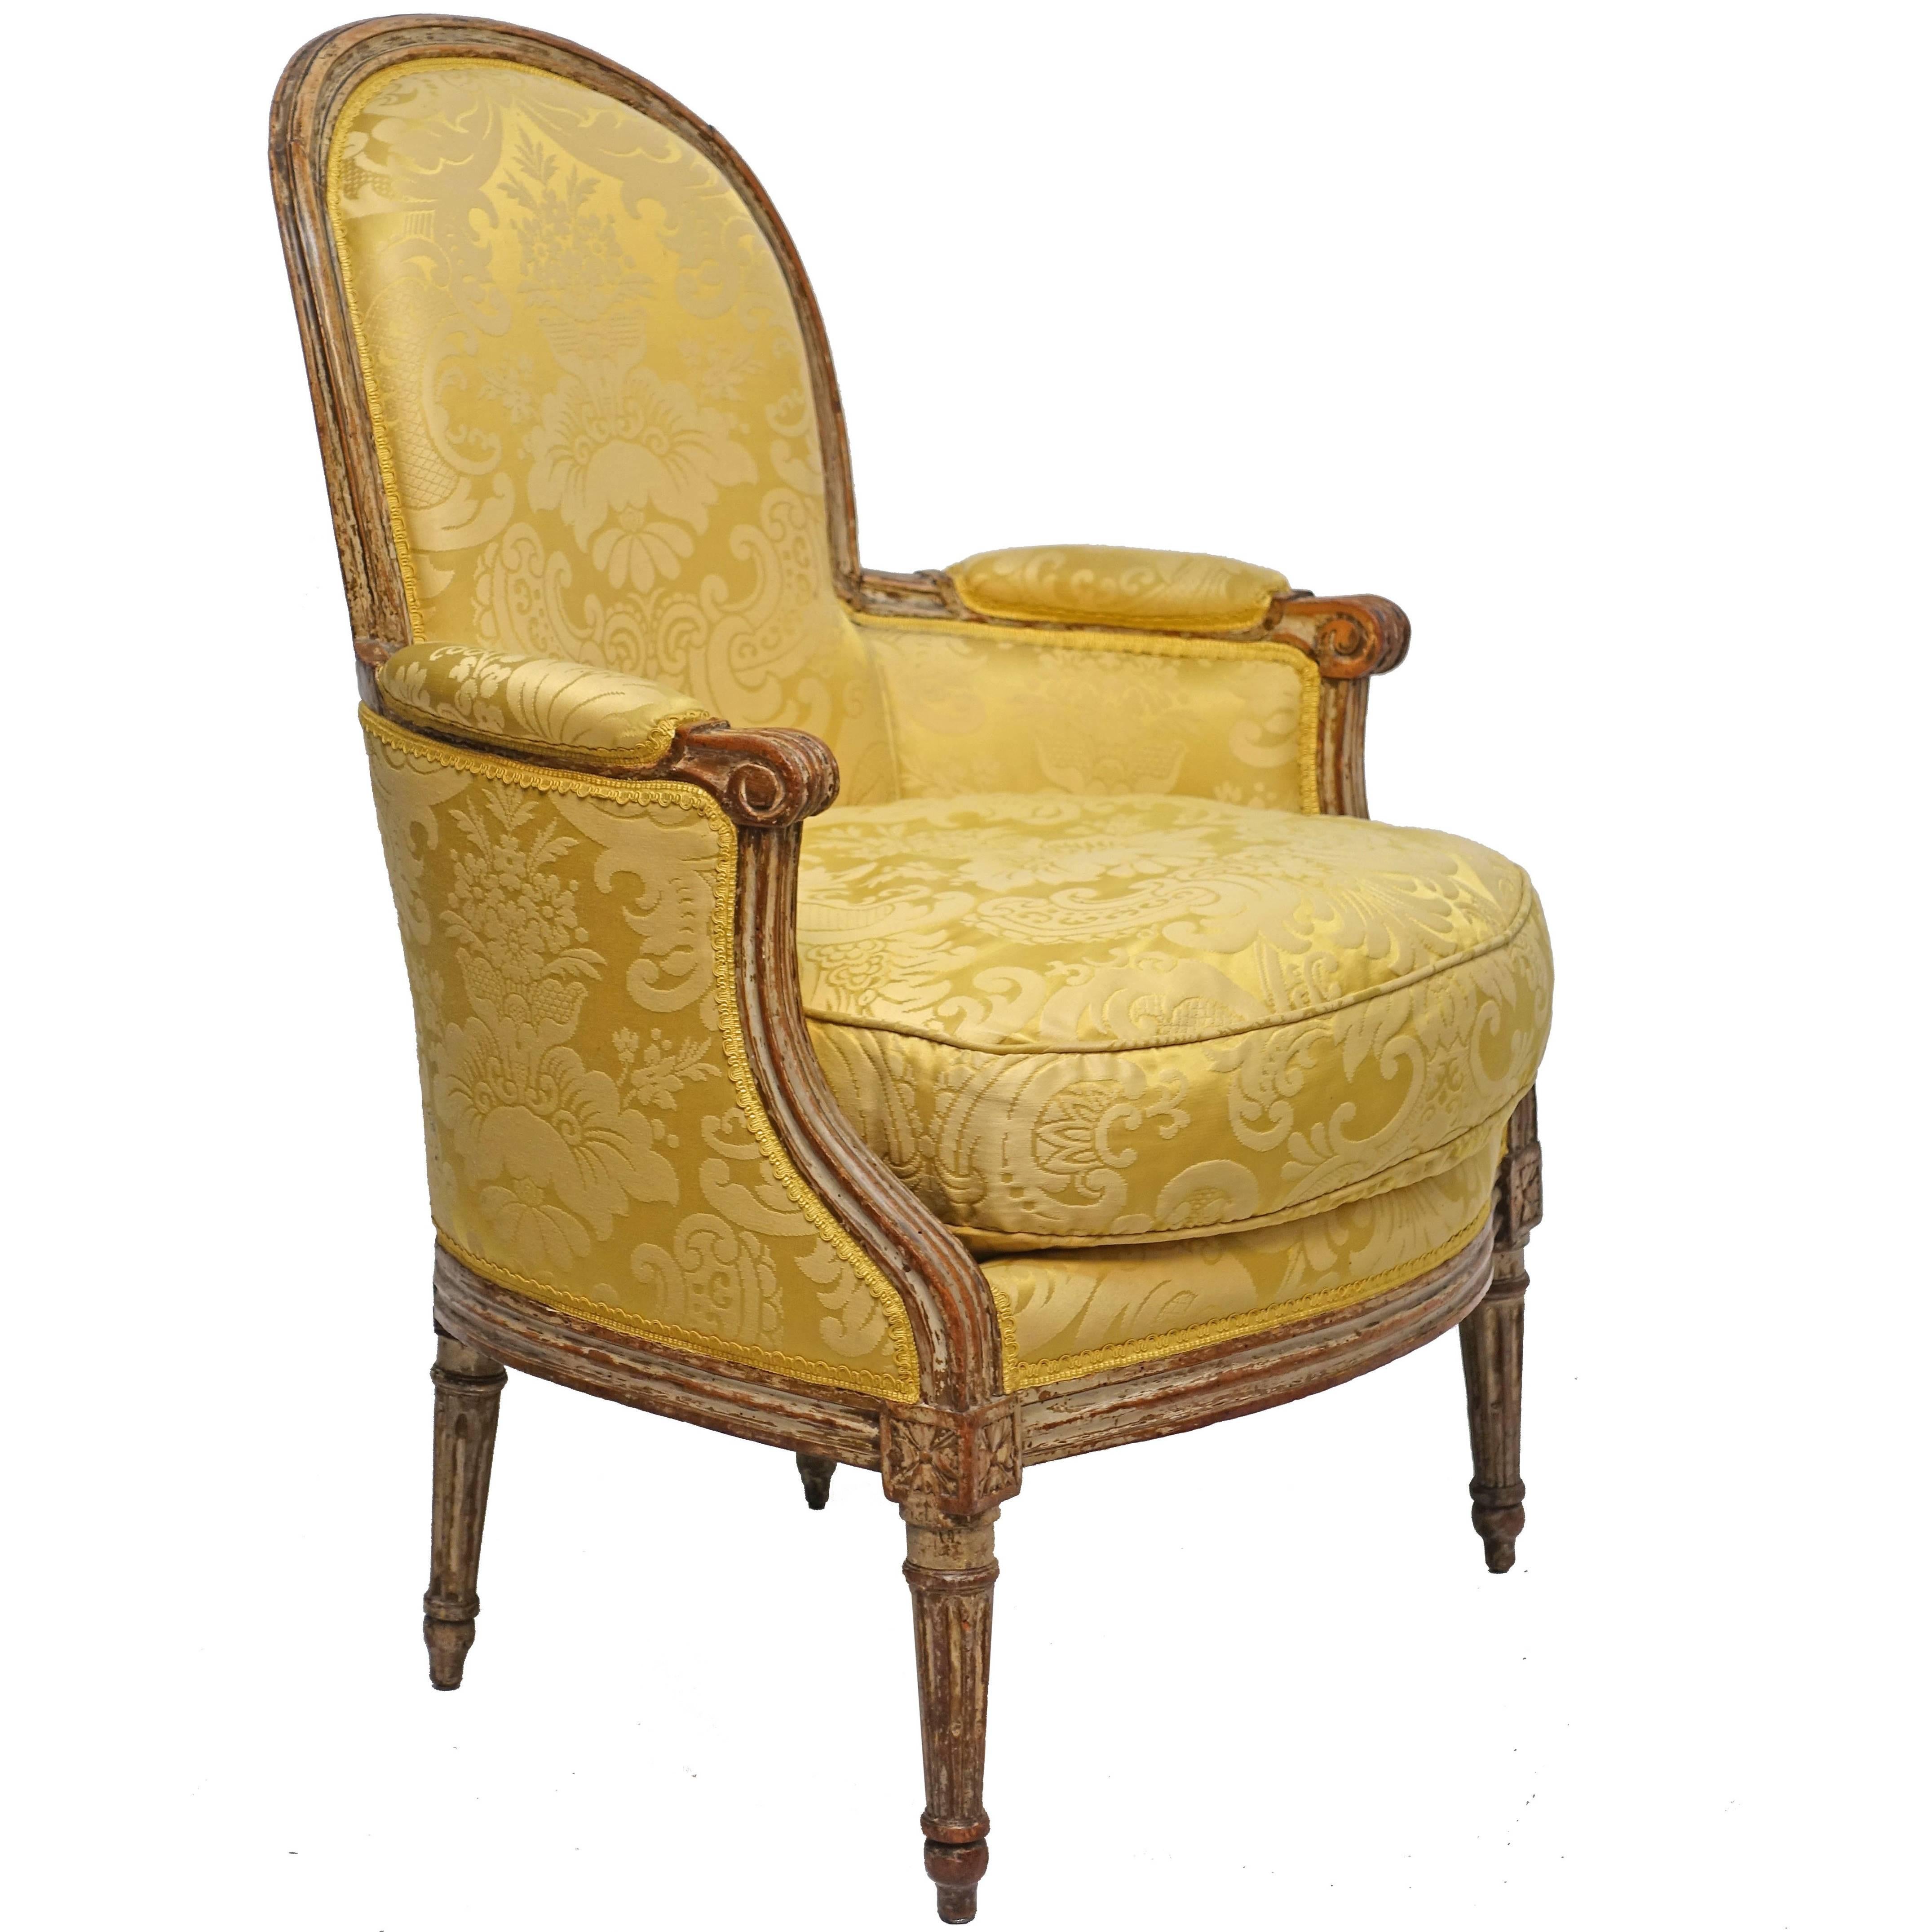 Louis XV Style Bergere Chair, French, Late 19th to Early 20th Century